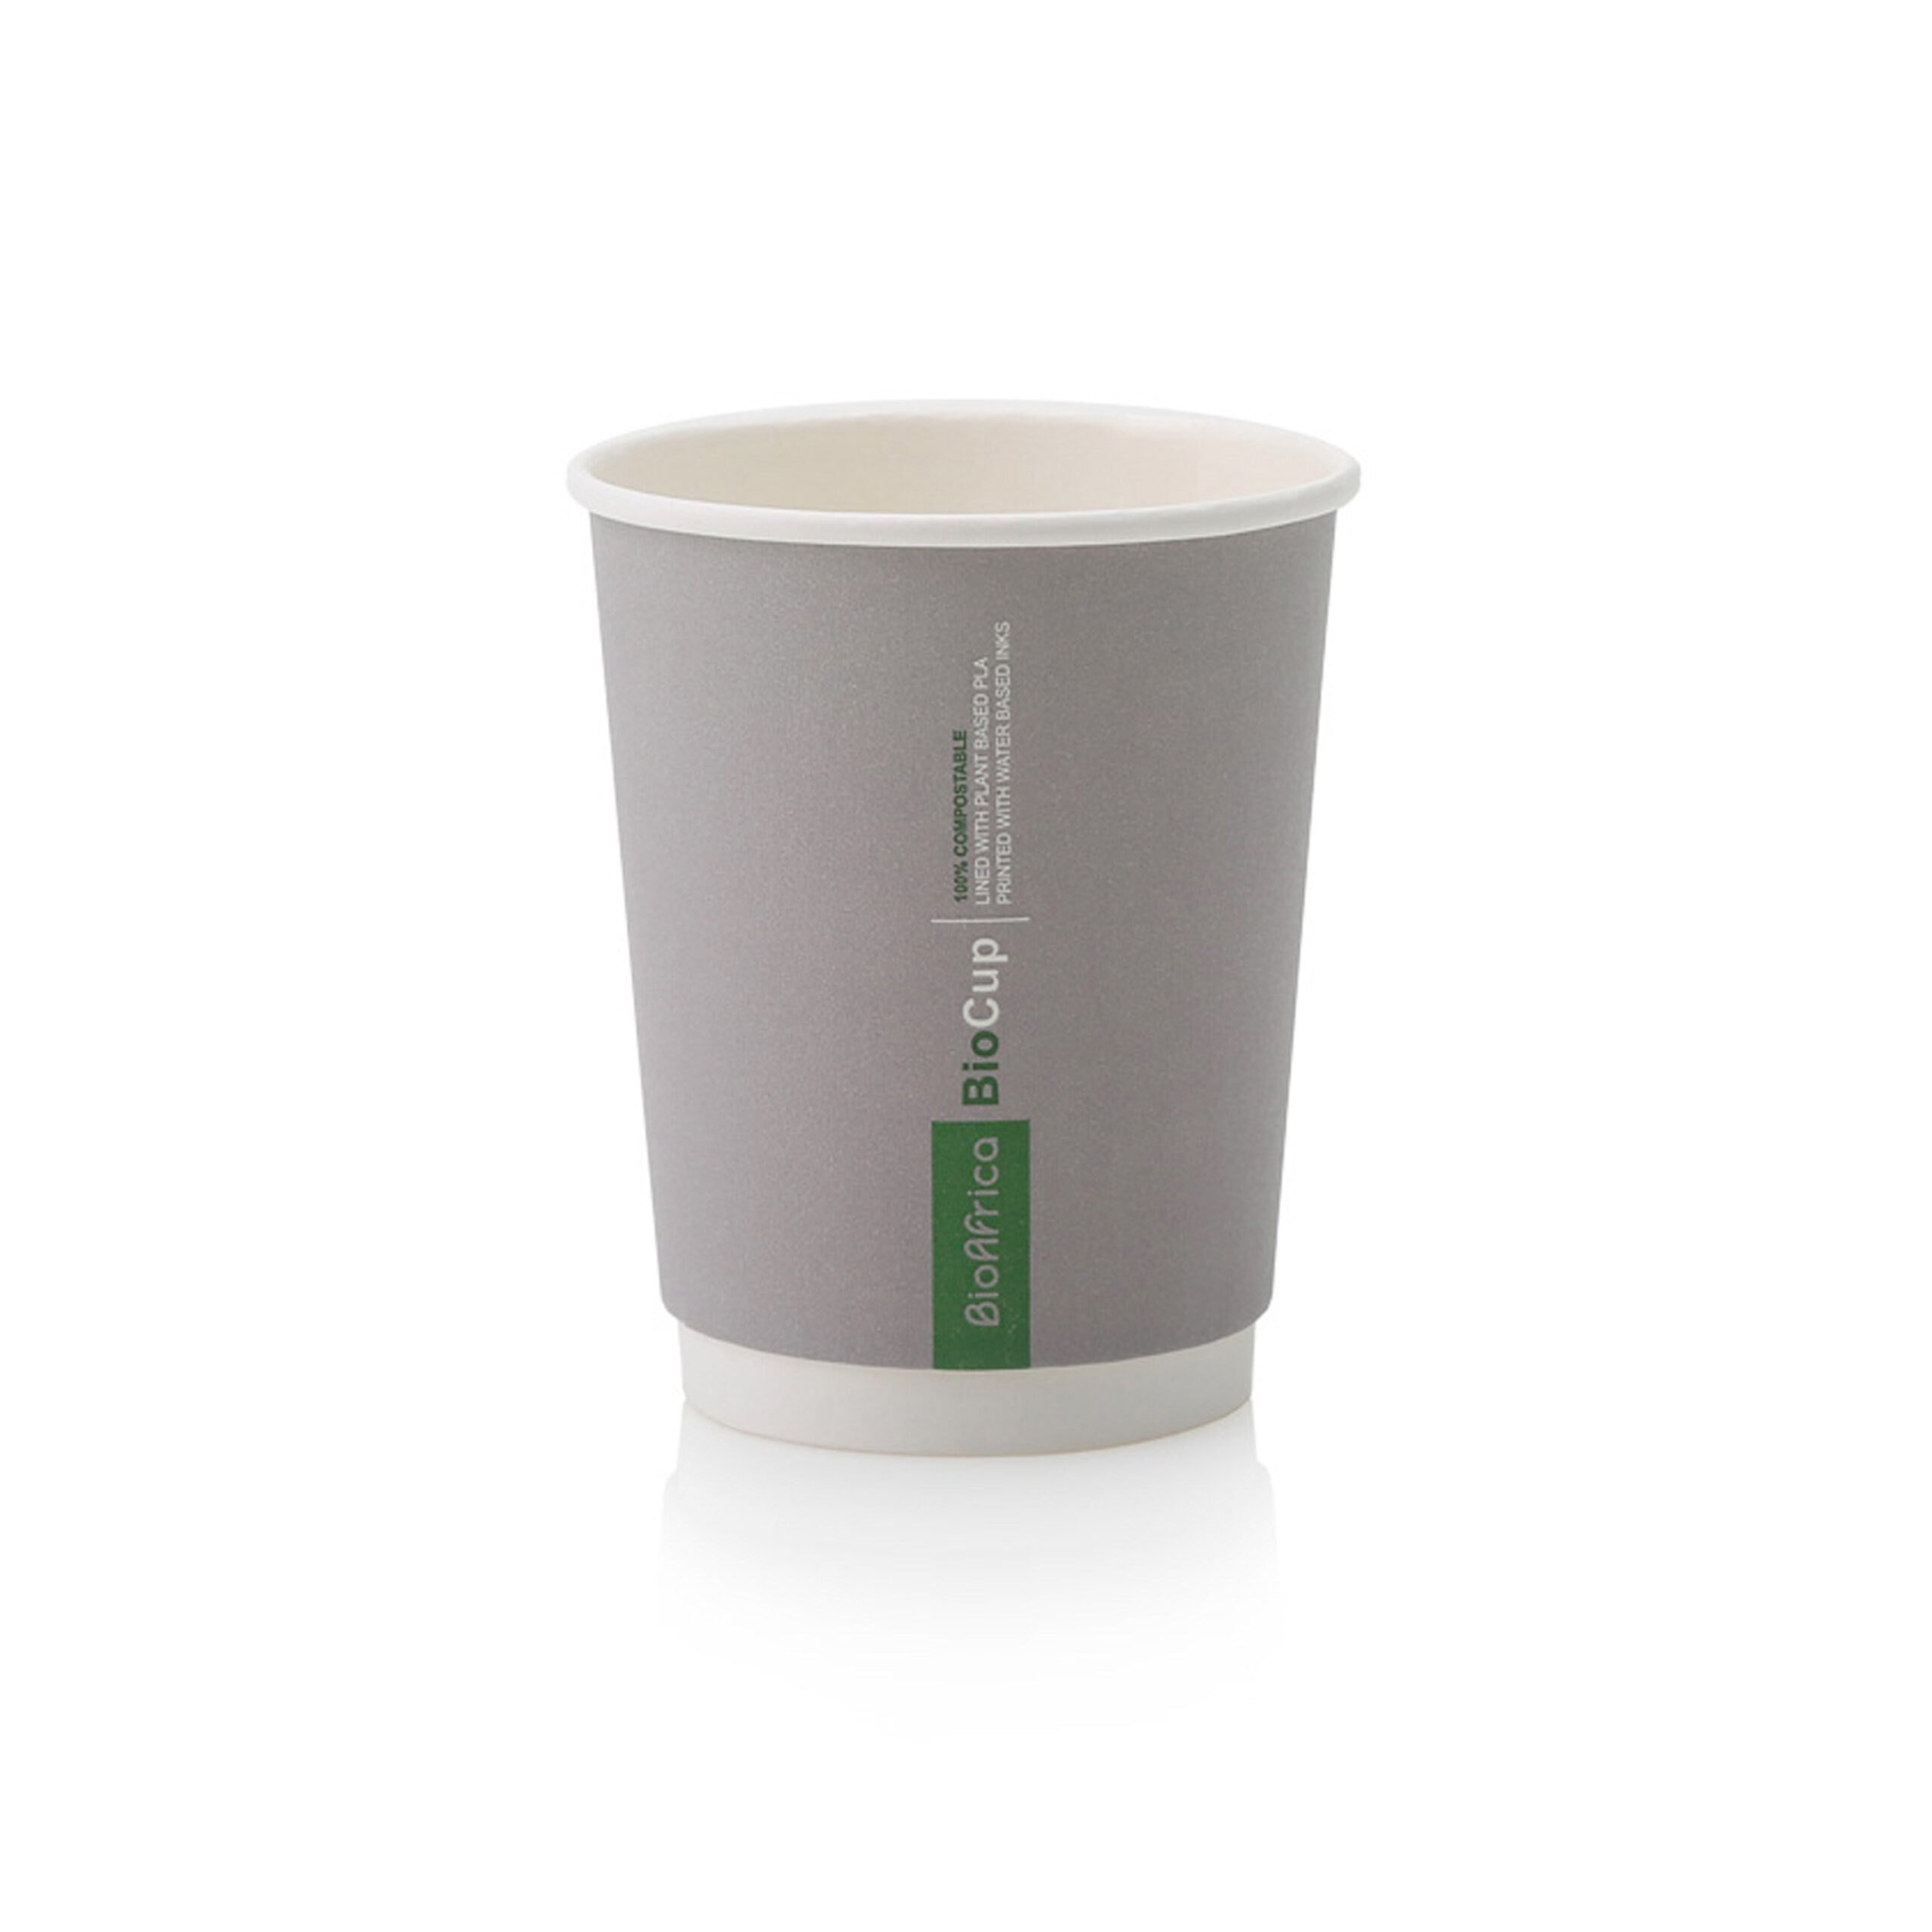 BIOAFRICA DOUBLE WALL COMPOSTABLE BIOCUP 250ml CHARCOAL 1x25